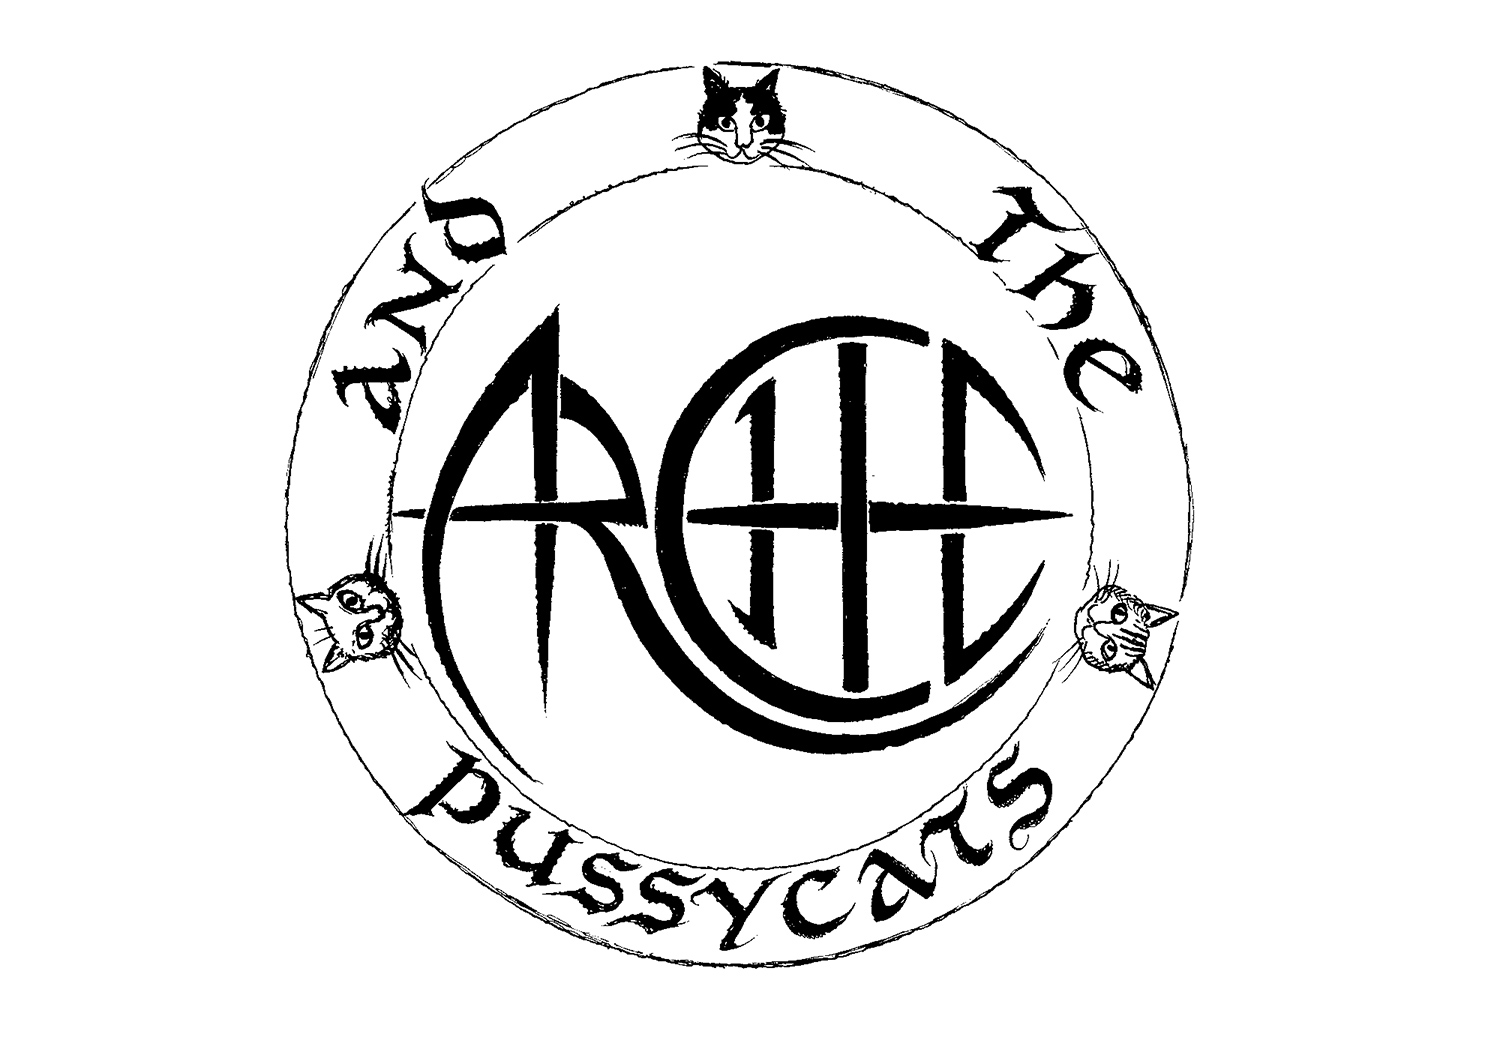 img/galleries/punk-rock/Archie-and-the-Pussycats-(Can).jpg